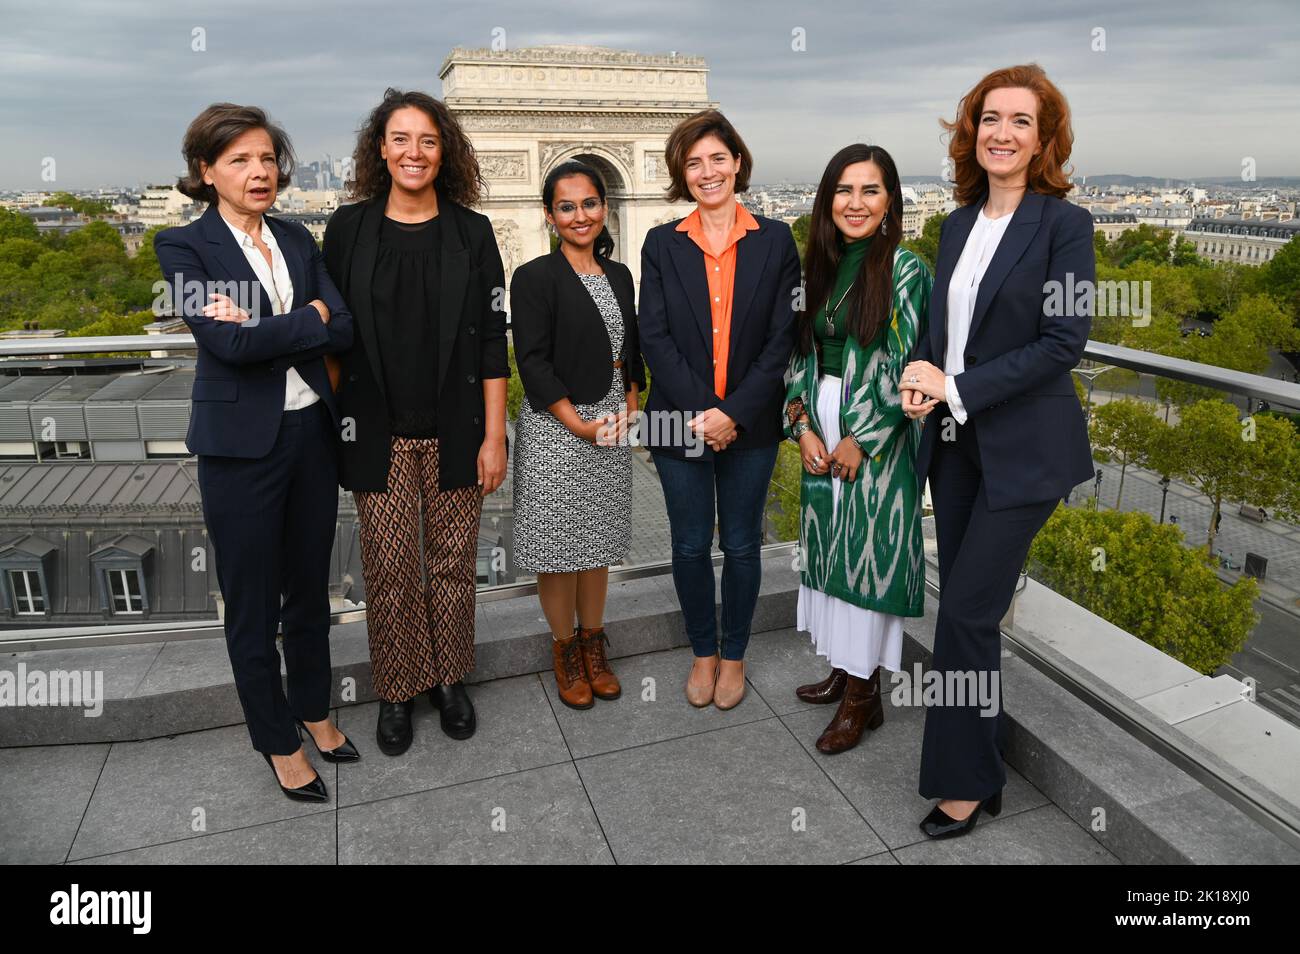 Anne-Gabrielle Heilbronner, General Secretary of Publicis Groupe, Souad Boutegrabet, CEO of Des Codeuses, Nupur Kohli, Dutch Founder and Director of NIIS Healthcare, Christel Heydemann, CEO of Orange, Nupur Kohli, Dutch Founder and Director of NIIS Healthcare and Anne-Laure de Chammard, CEO of Energy Solutions International, ENGIE, at the Women's Forum Rising Talents event in Paris, France on September 16, 2022. Photo by Laurent Zabulon/ABACAPRESS.COM Stock Photo